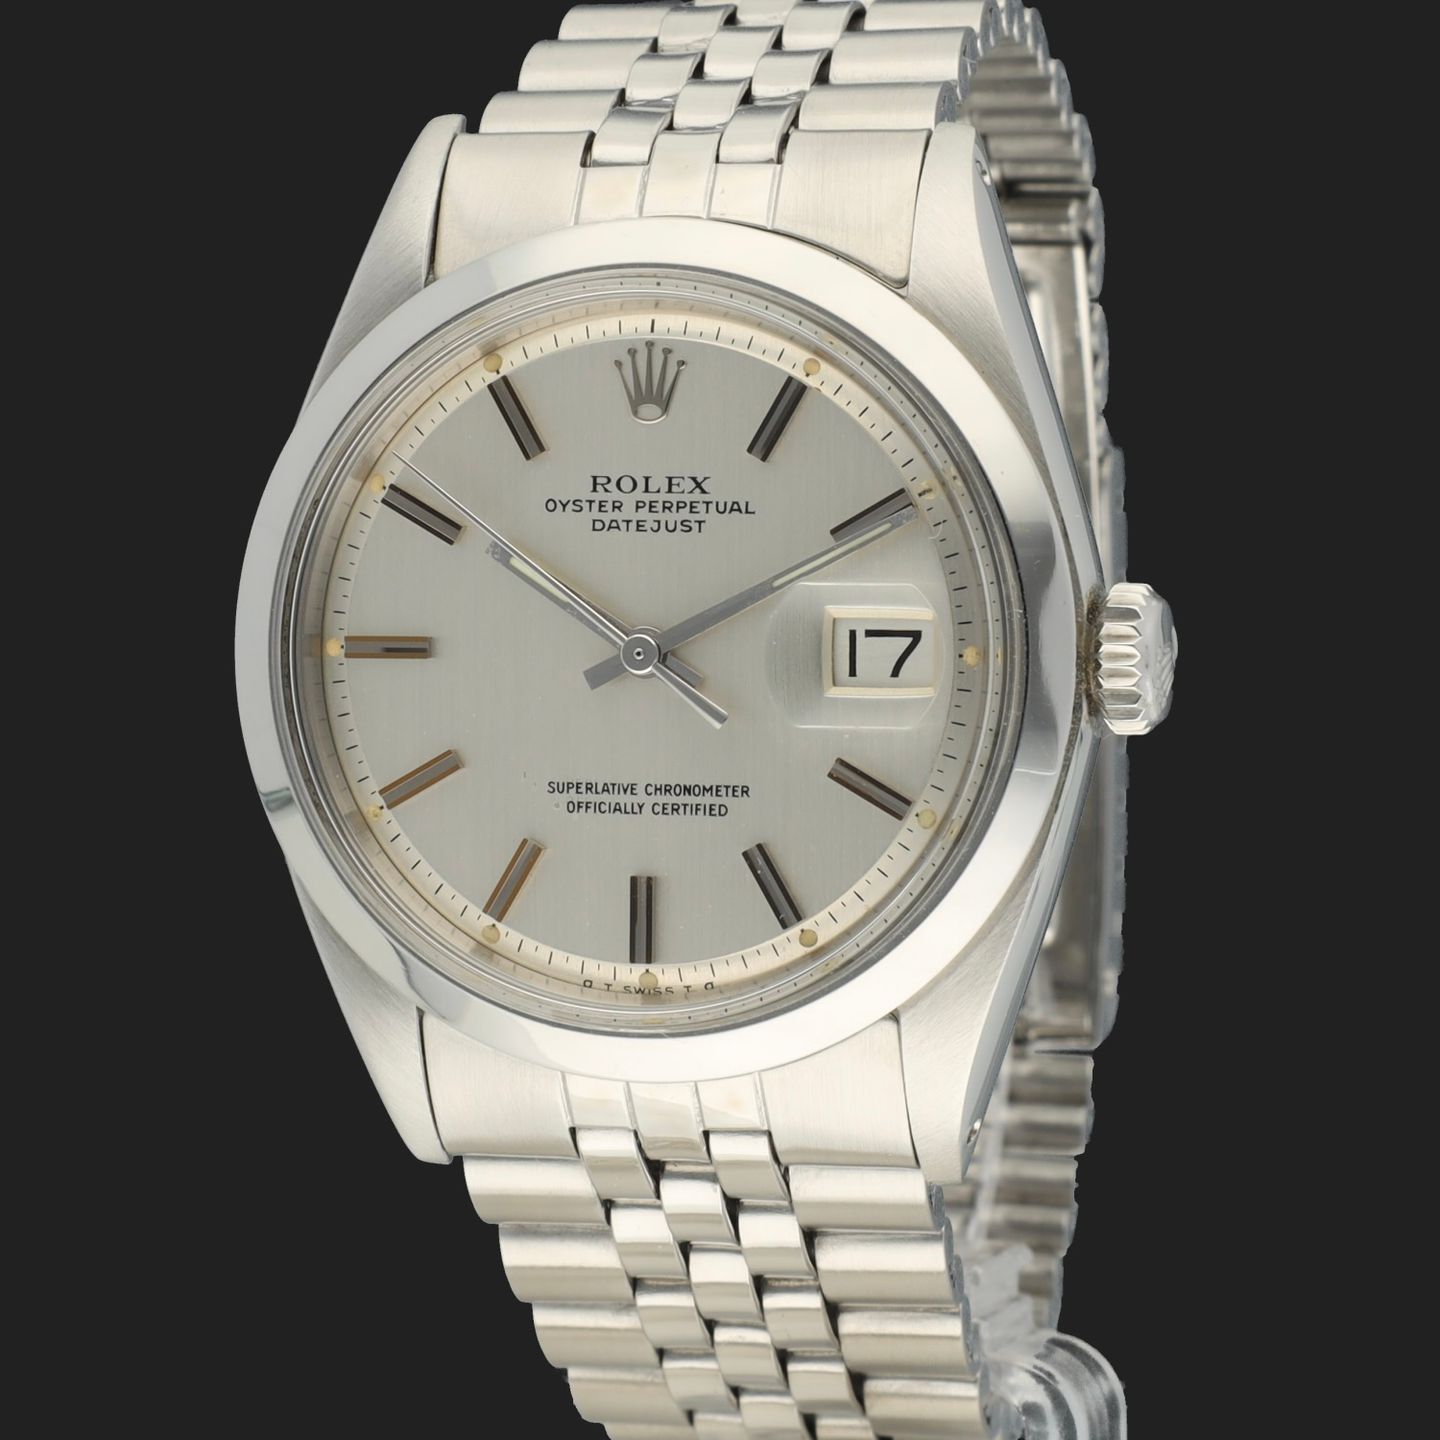 Rolex Datejust 1600 (1971) - 36mm Staal (1/7)